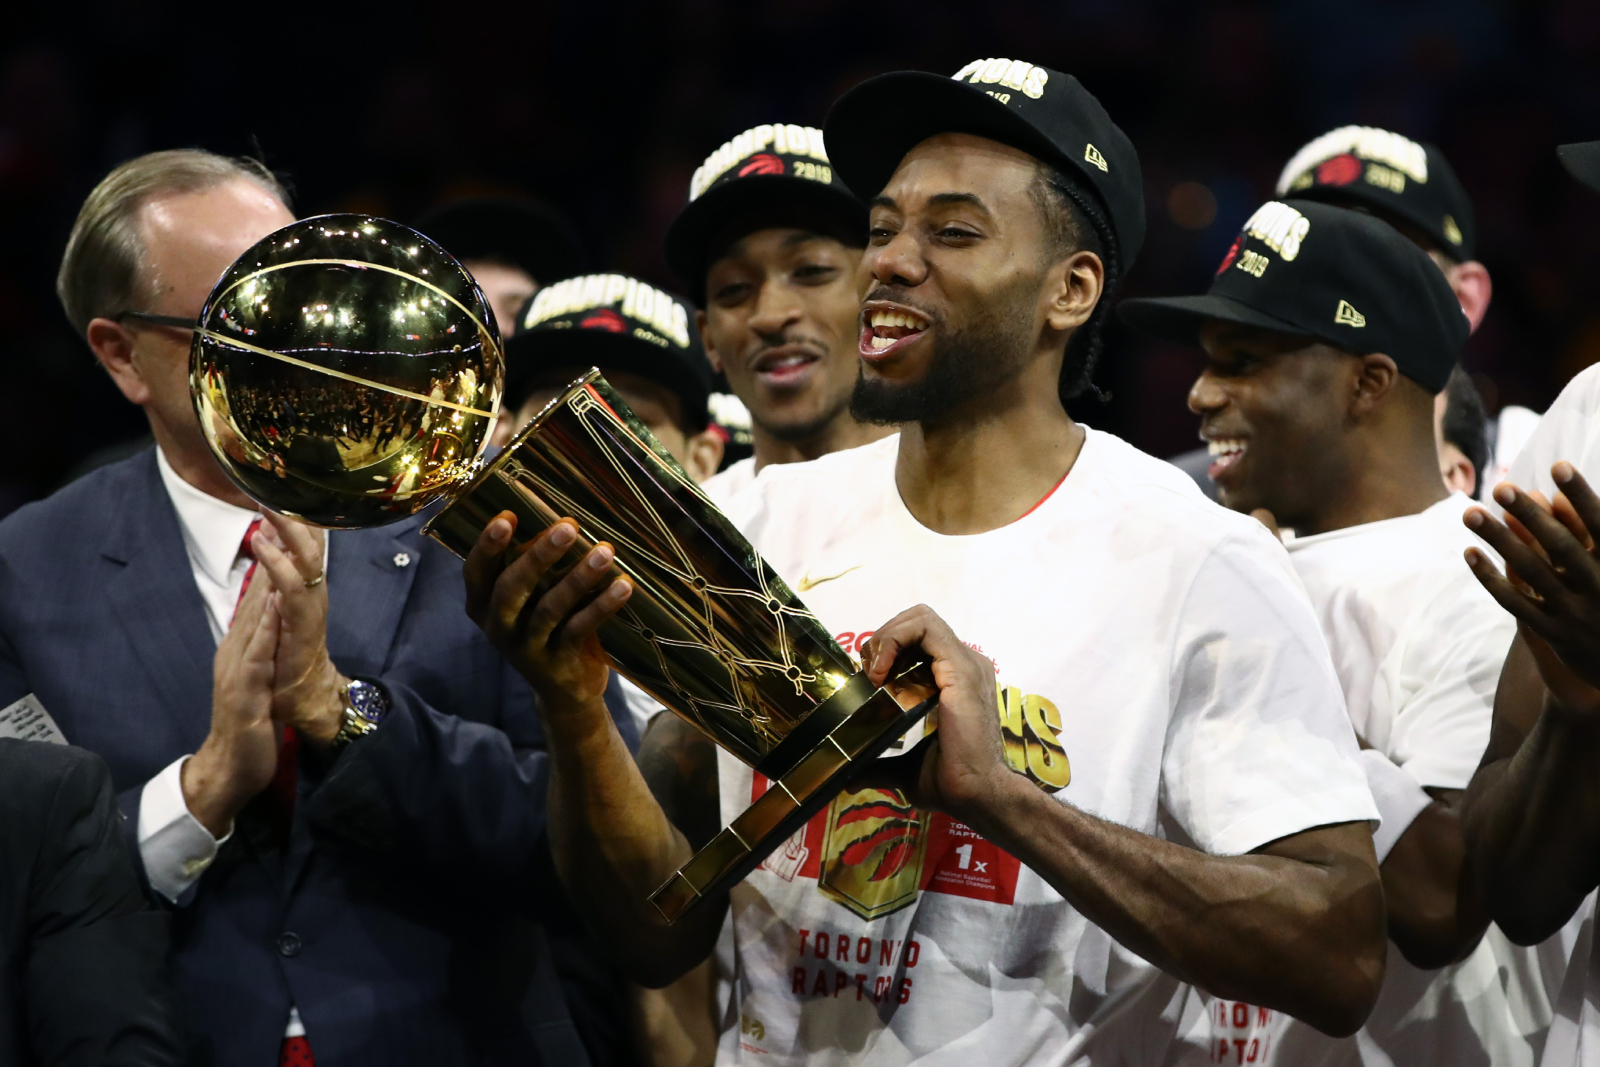 Kawhi Leonard Reveals an Unexpected Reason Why He Couldn’t Stay With the Raptors